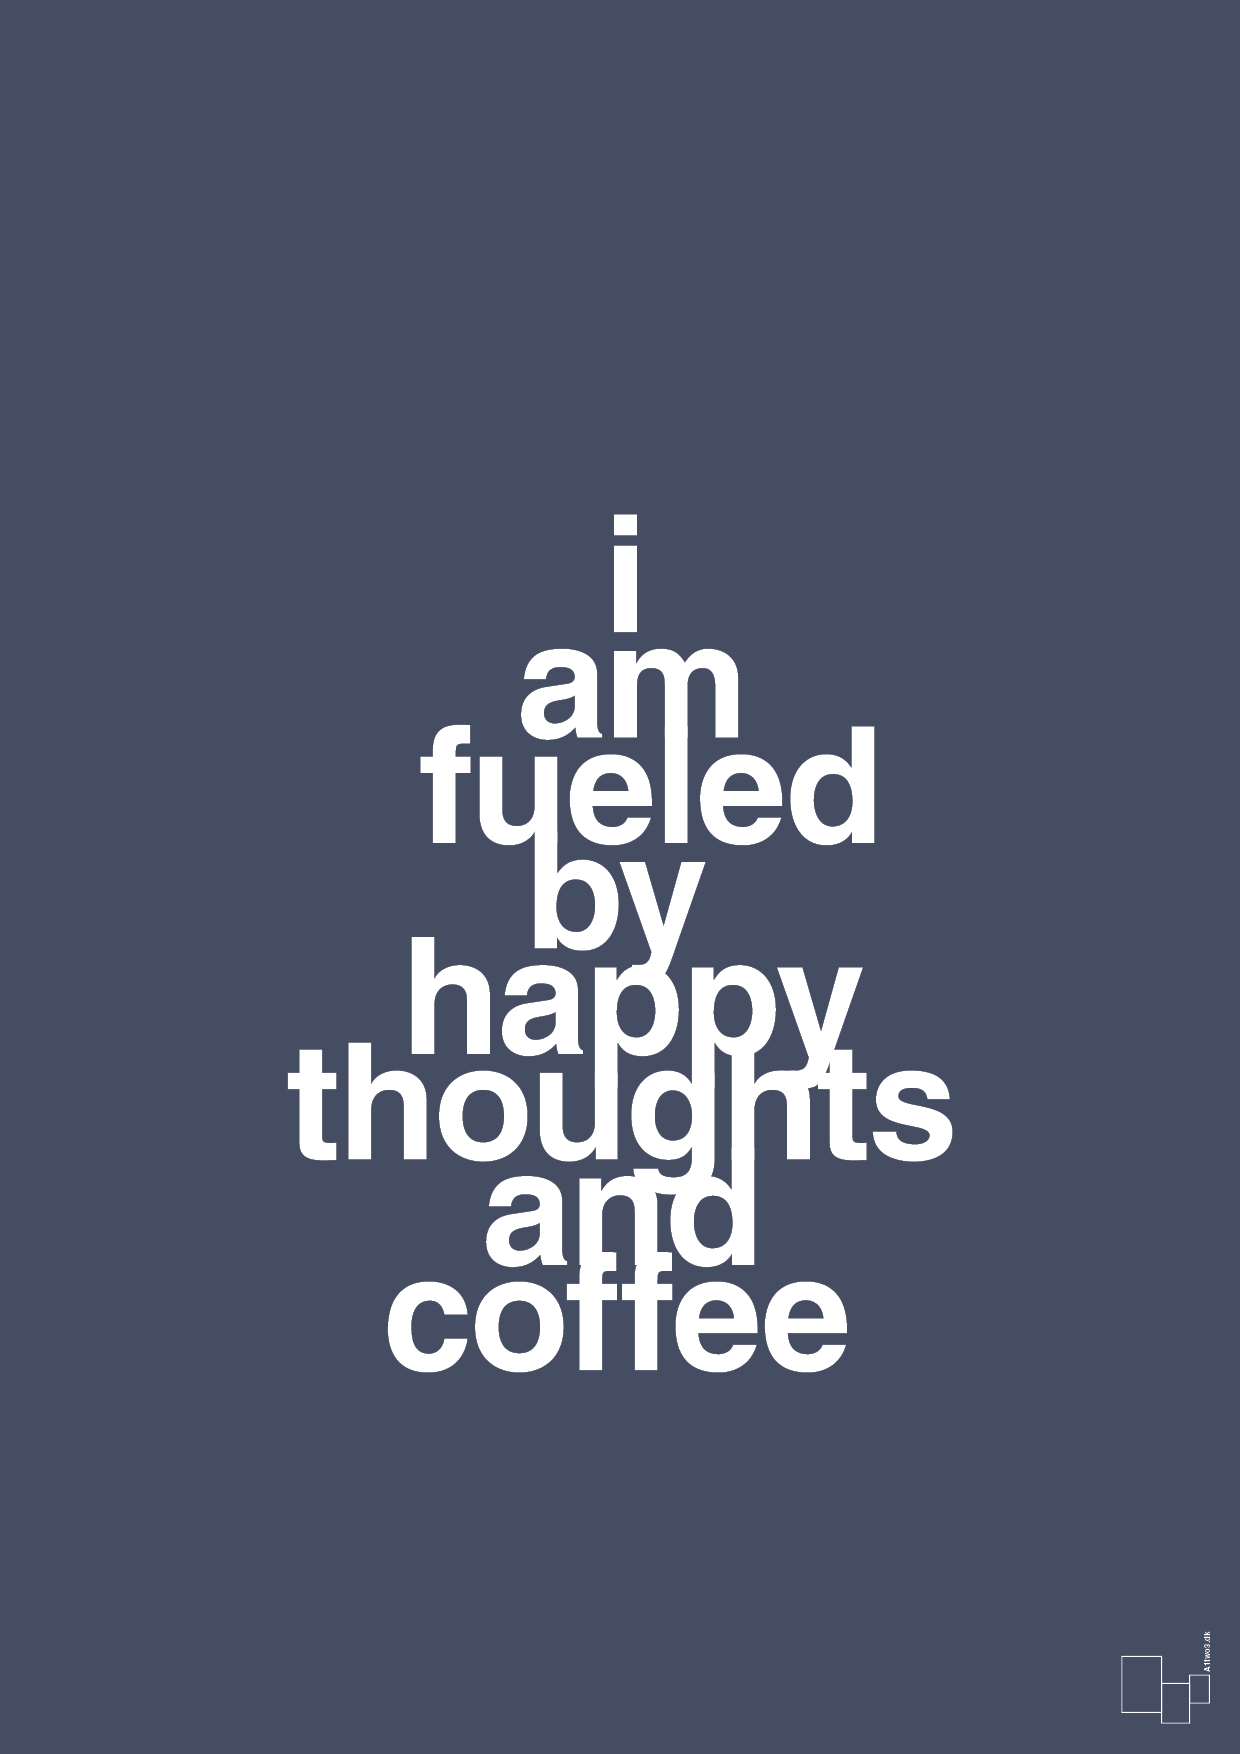 i am fueled by happy thoughts and coffee - Plakat med Mad & Drikke i Petrol